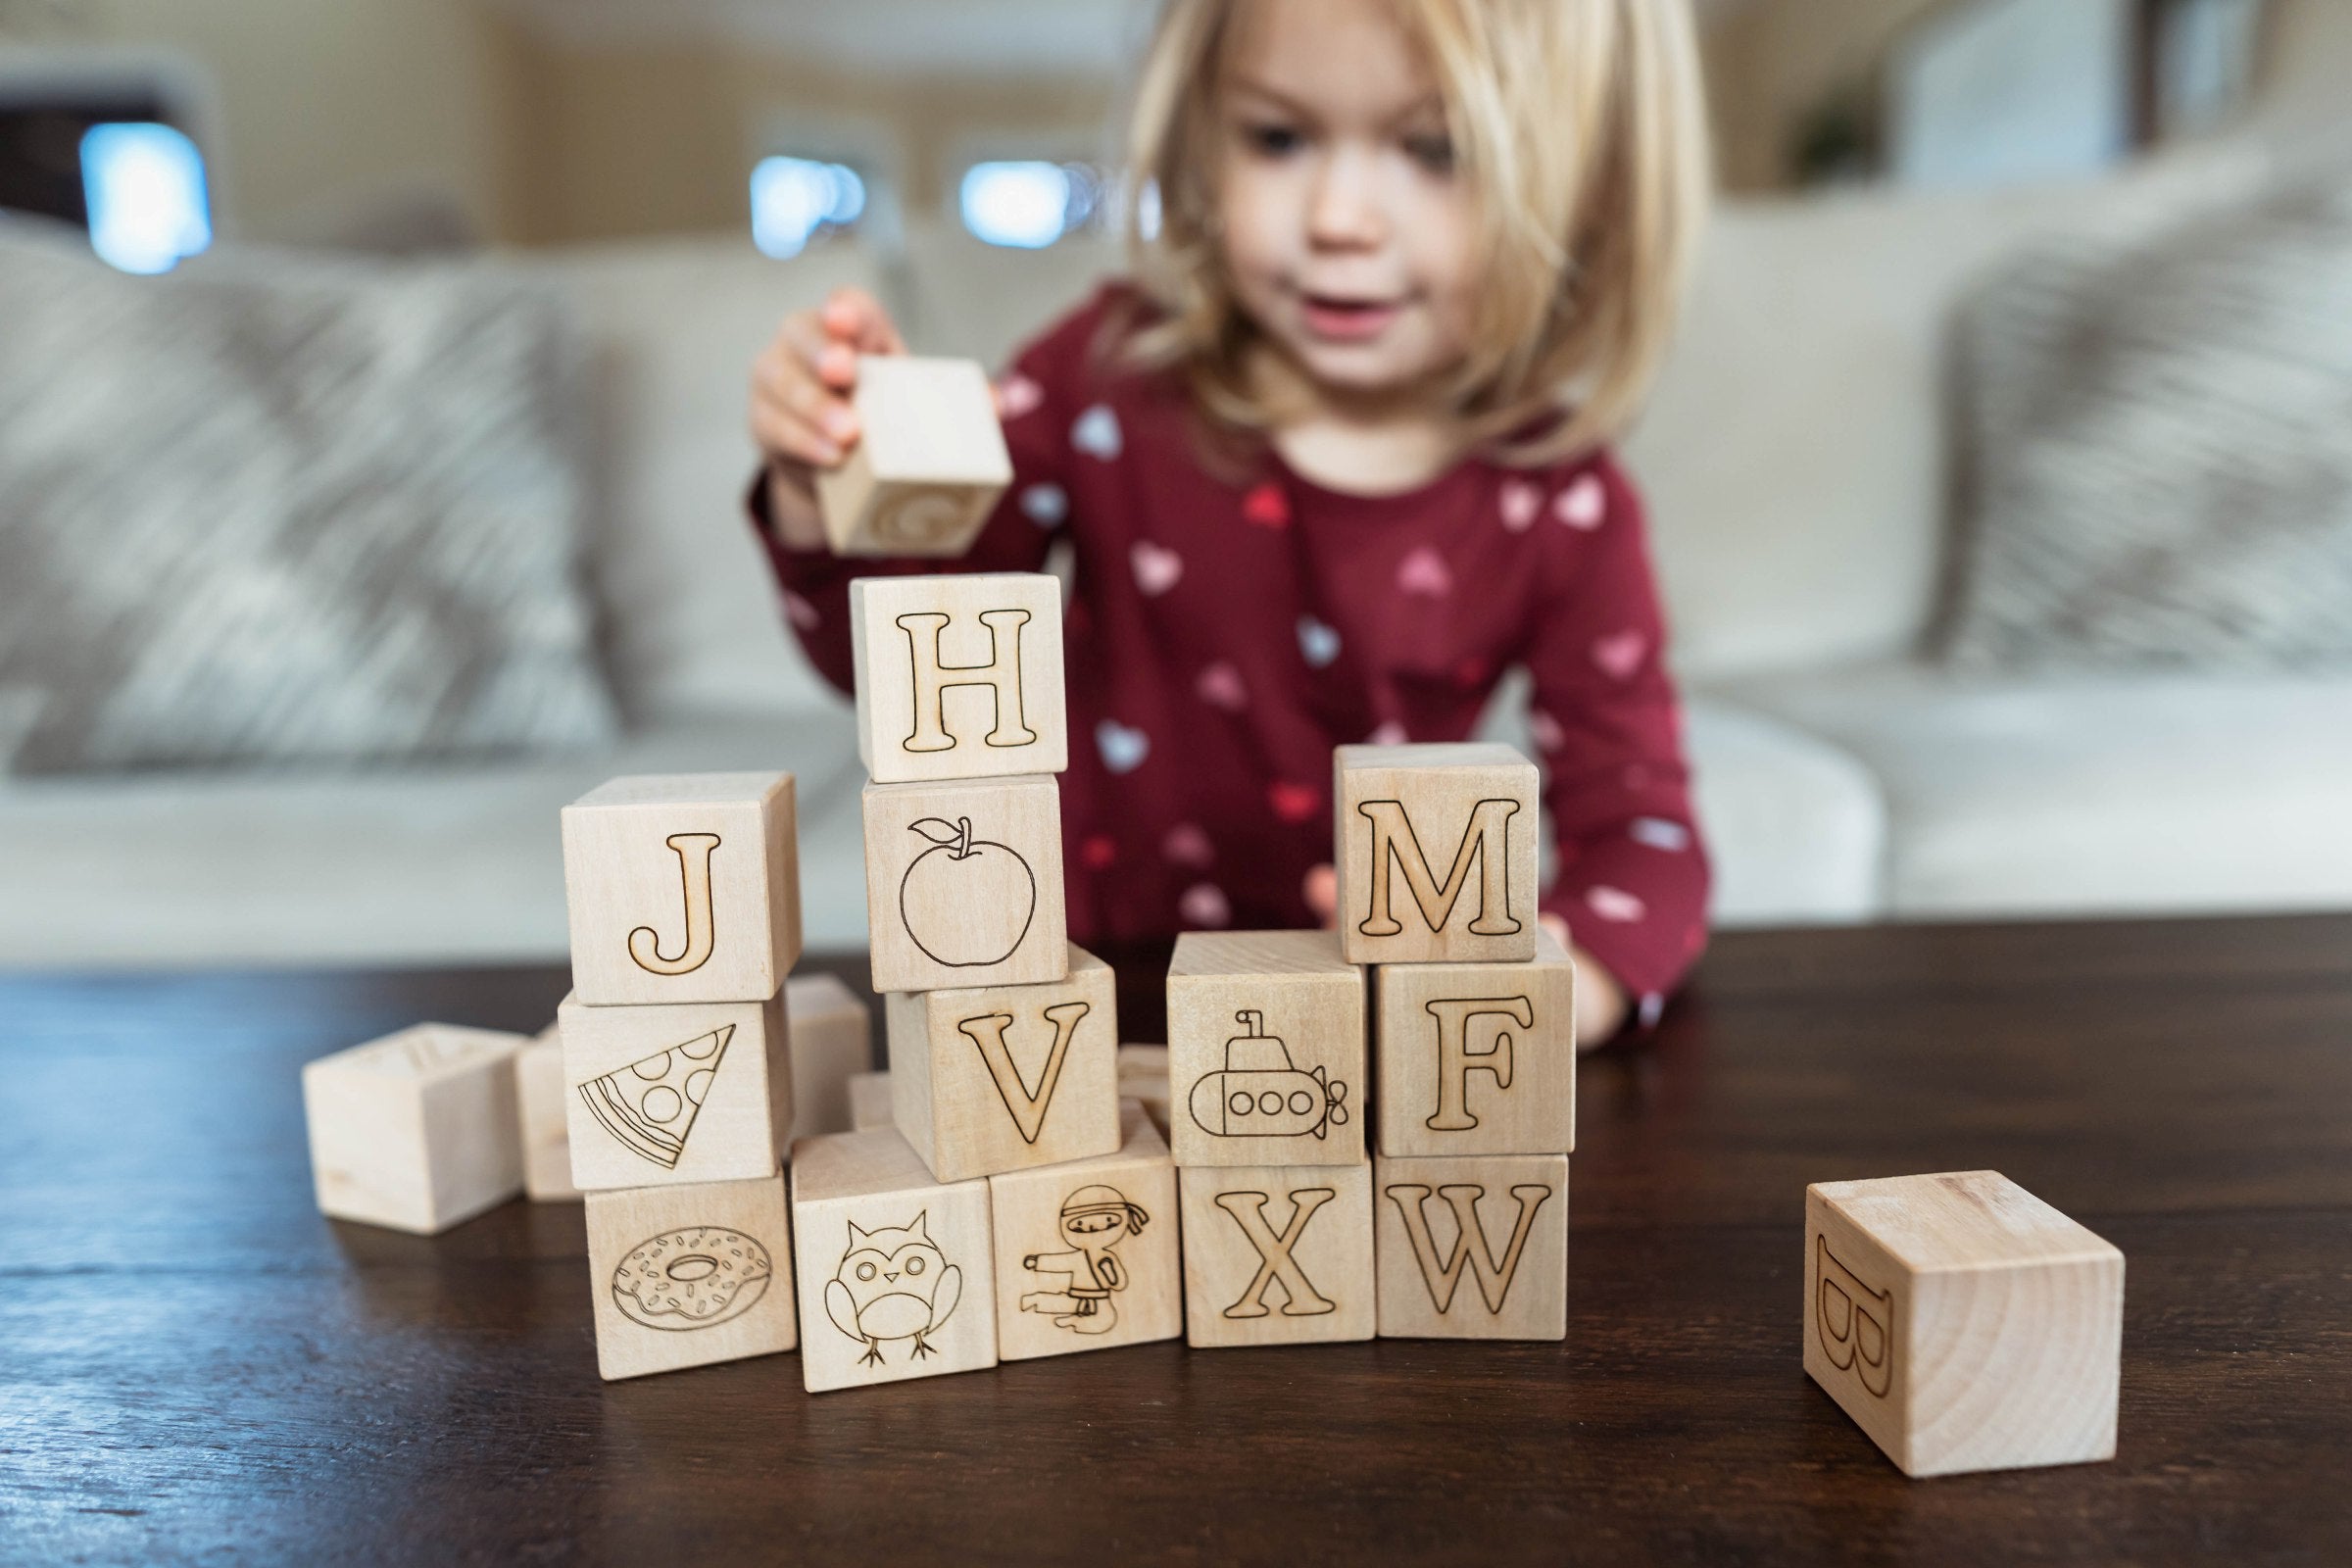 Child playing with wooden blocks